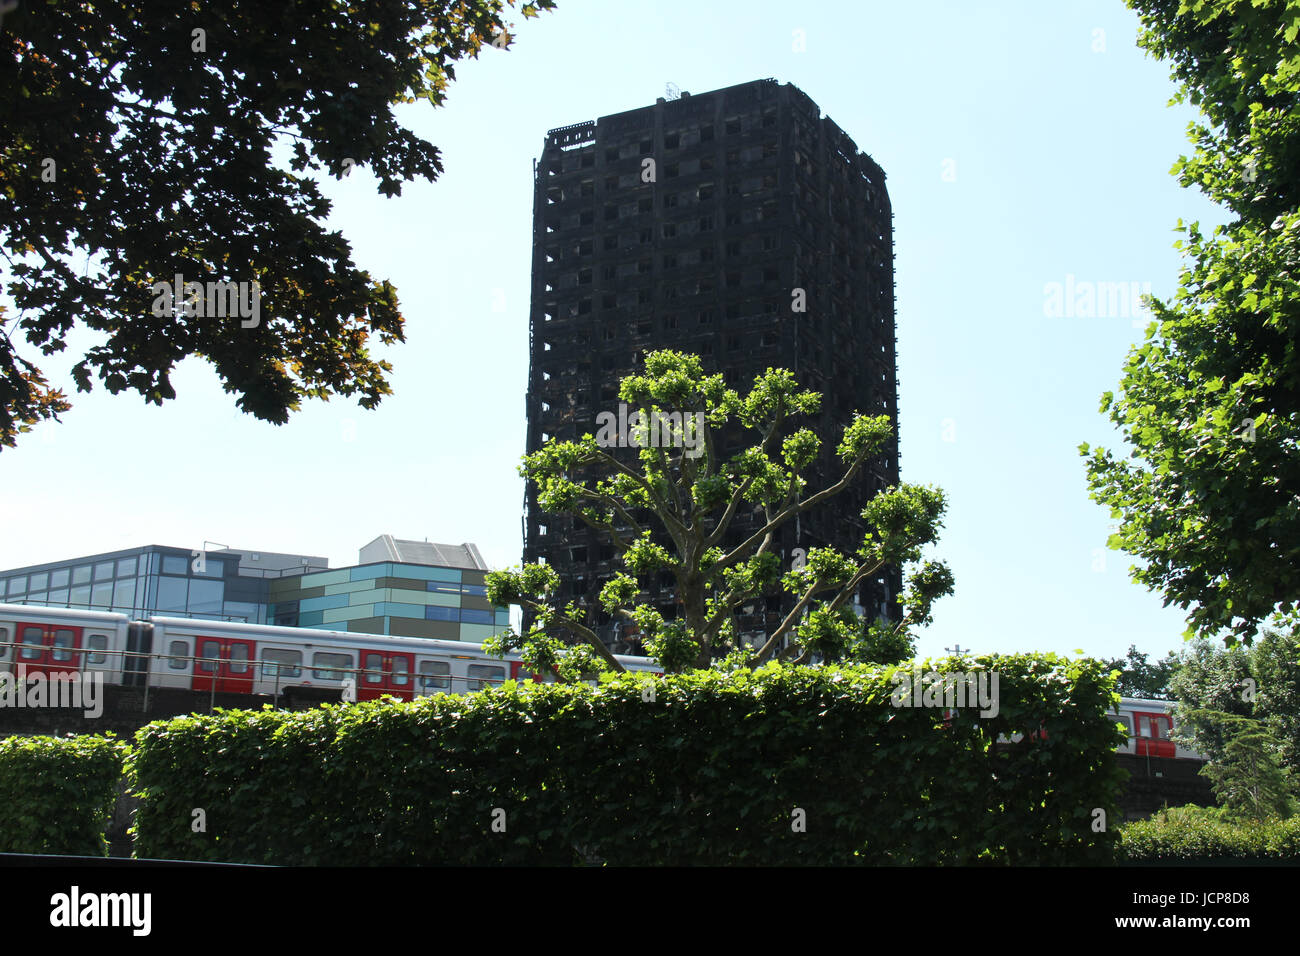 London, UK. 16th June, 2017. A TFL tube train speeds on the tracks below the charred remains of the 24-storey block Grenfell Tower block. At least 30 people have bene confirmed dead with about 70 missing and feared dead. Credit: David Mbiyu/Alamy Live News  Stock Photo